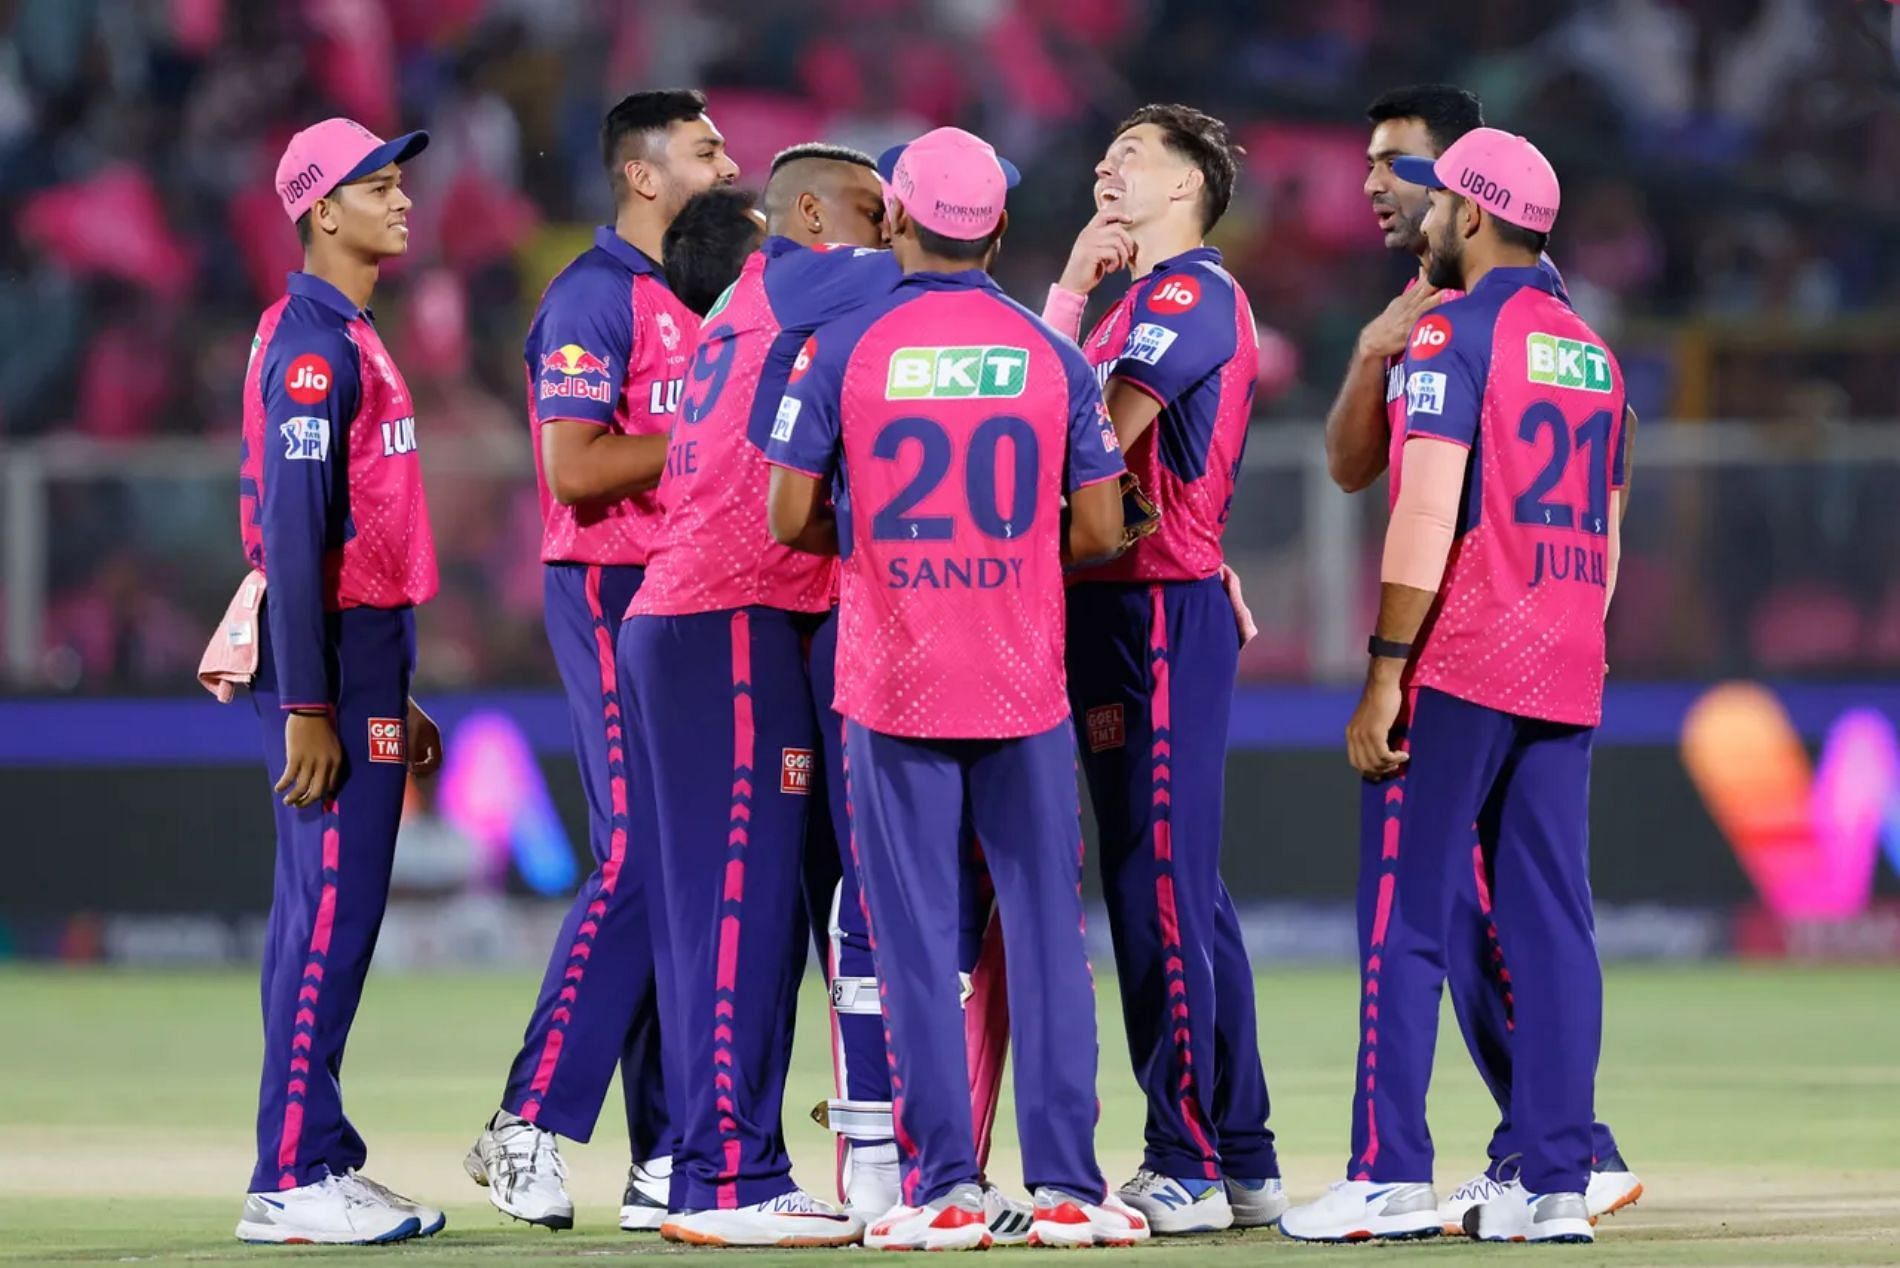 Rajasthan Royals players celebrate a wicket. (Pic: BCCI/ iplt20.com)